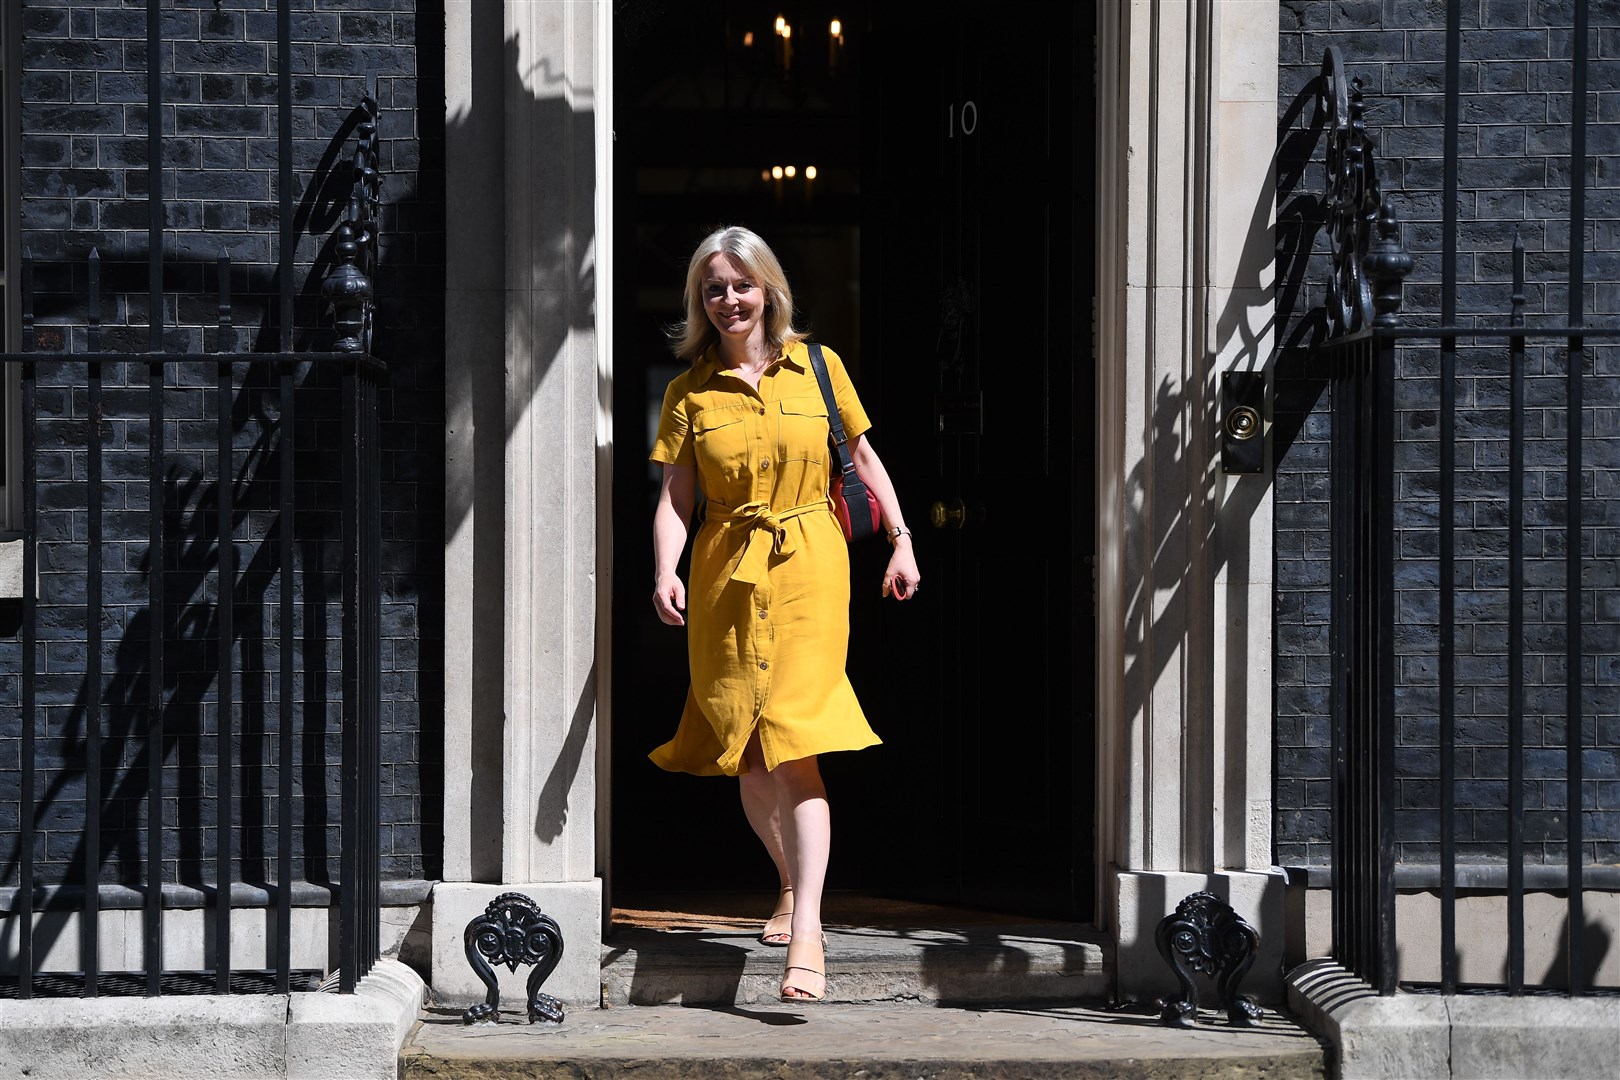 Liz Truss leaves No 10 after a Cabinet meeting in 2019 (Victoria Jones/PA)